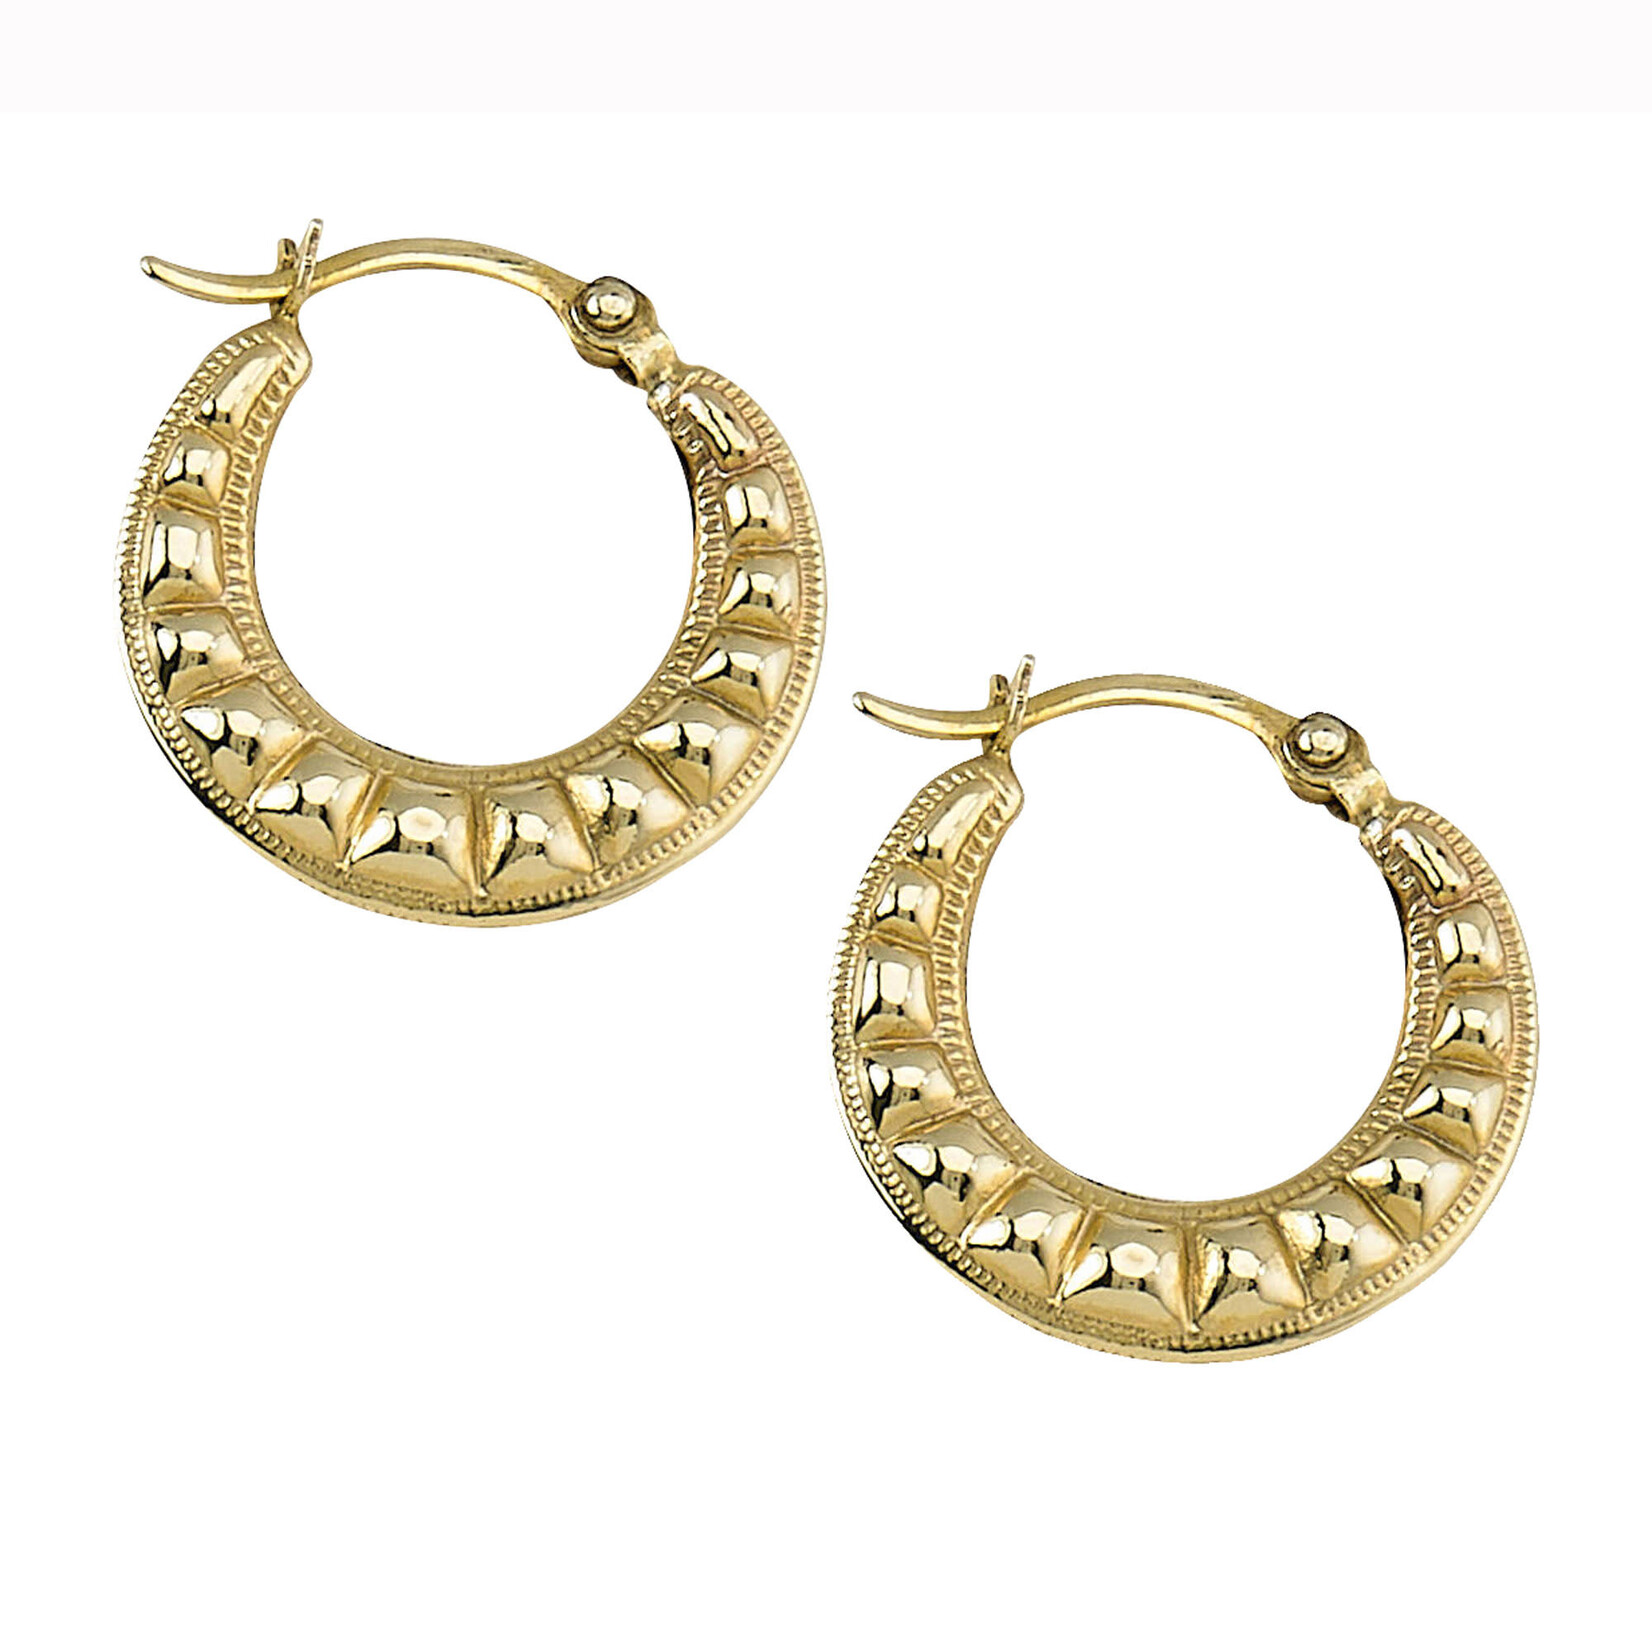 10K Yellow Gold Textured Hoops